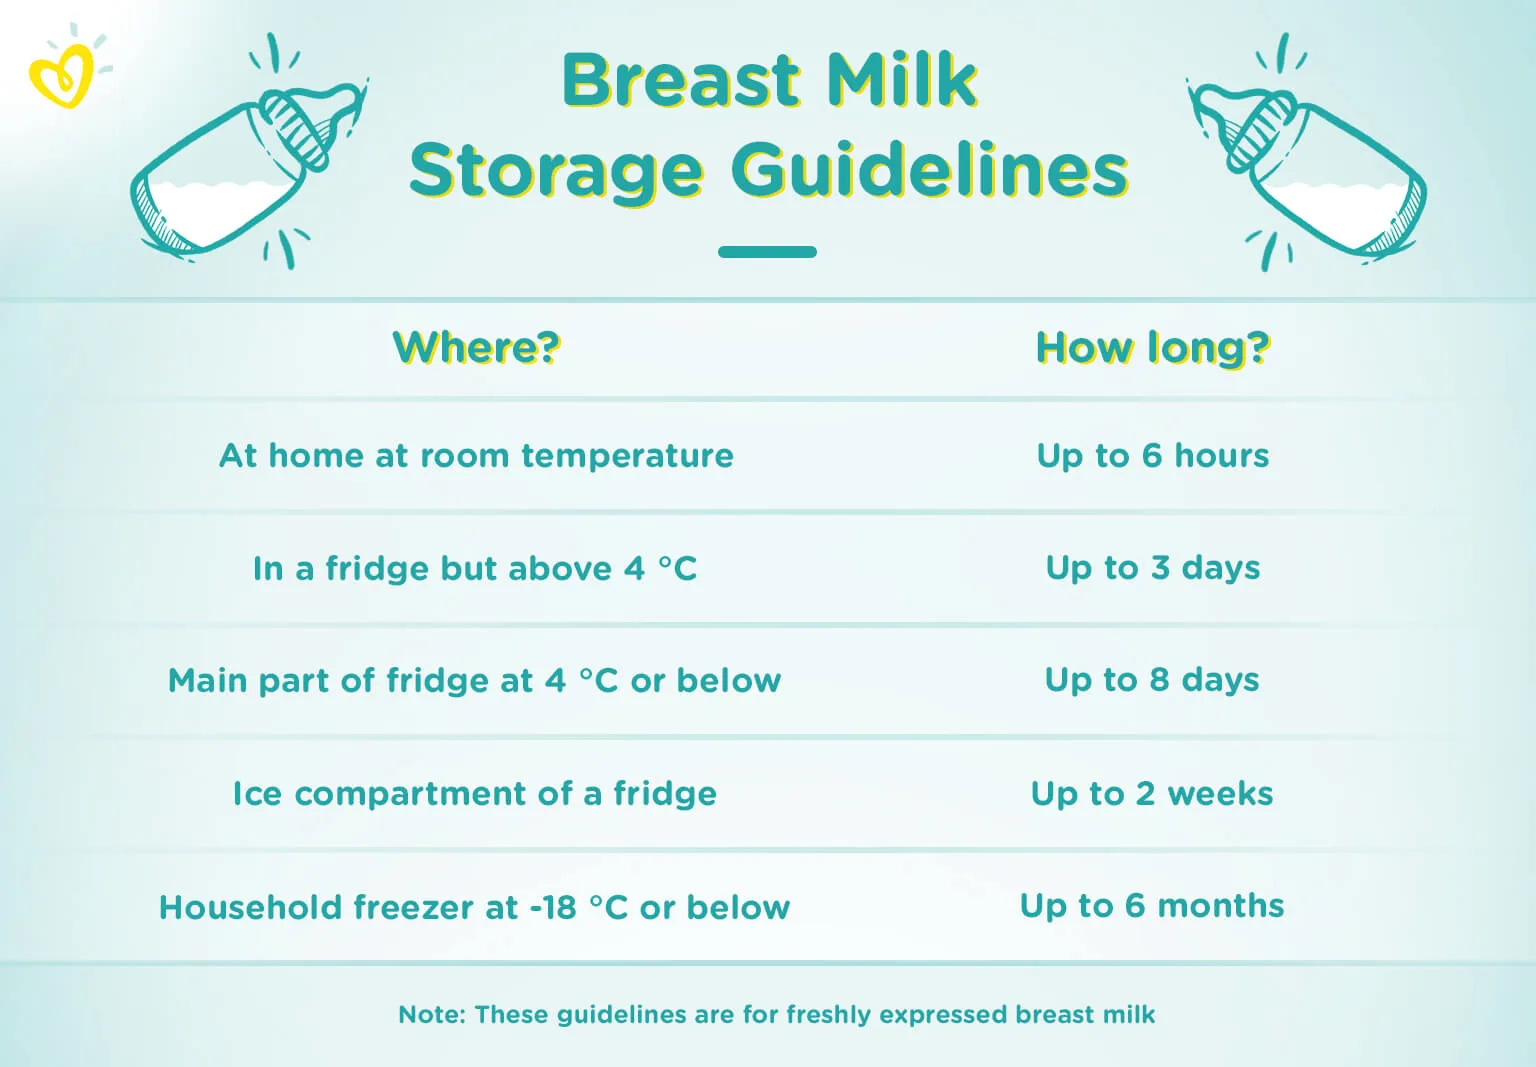 Can You Mix Fresh and Previously Collected Breast Milk?